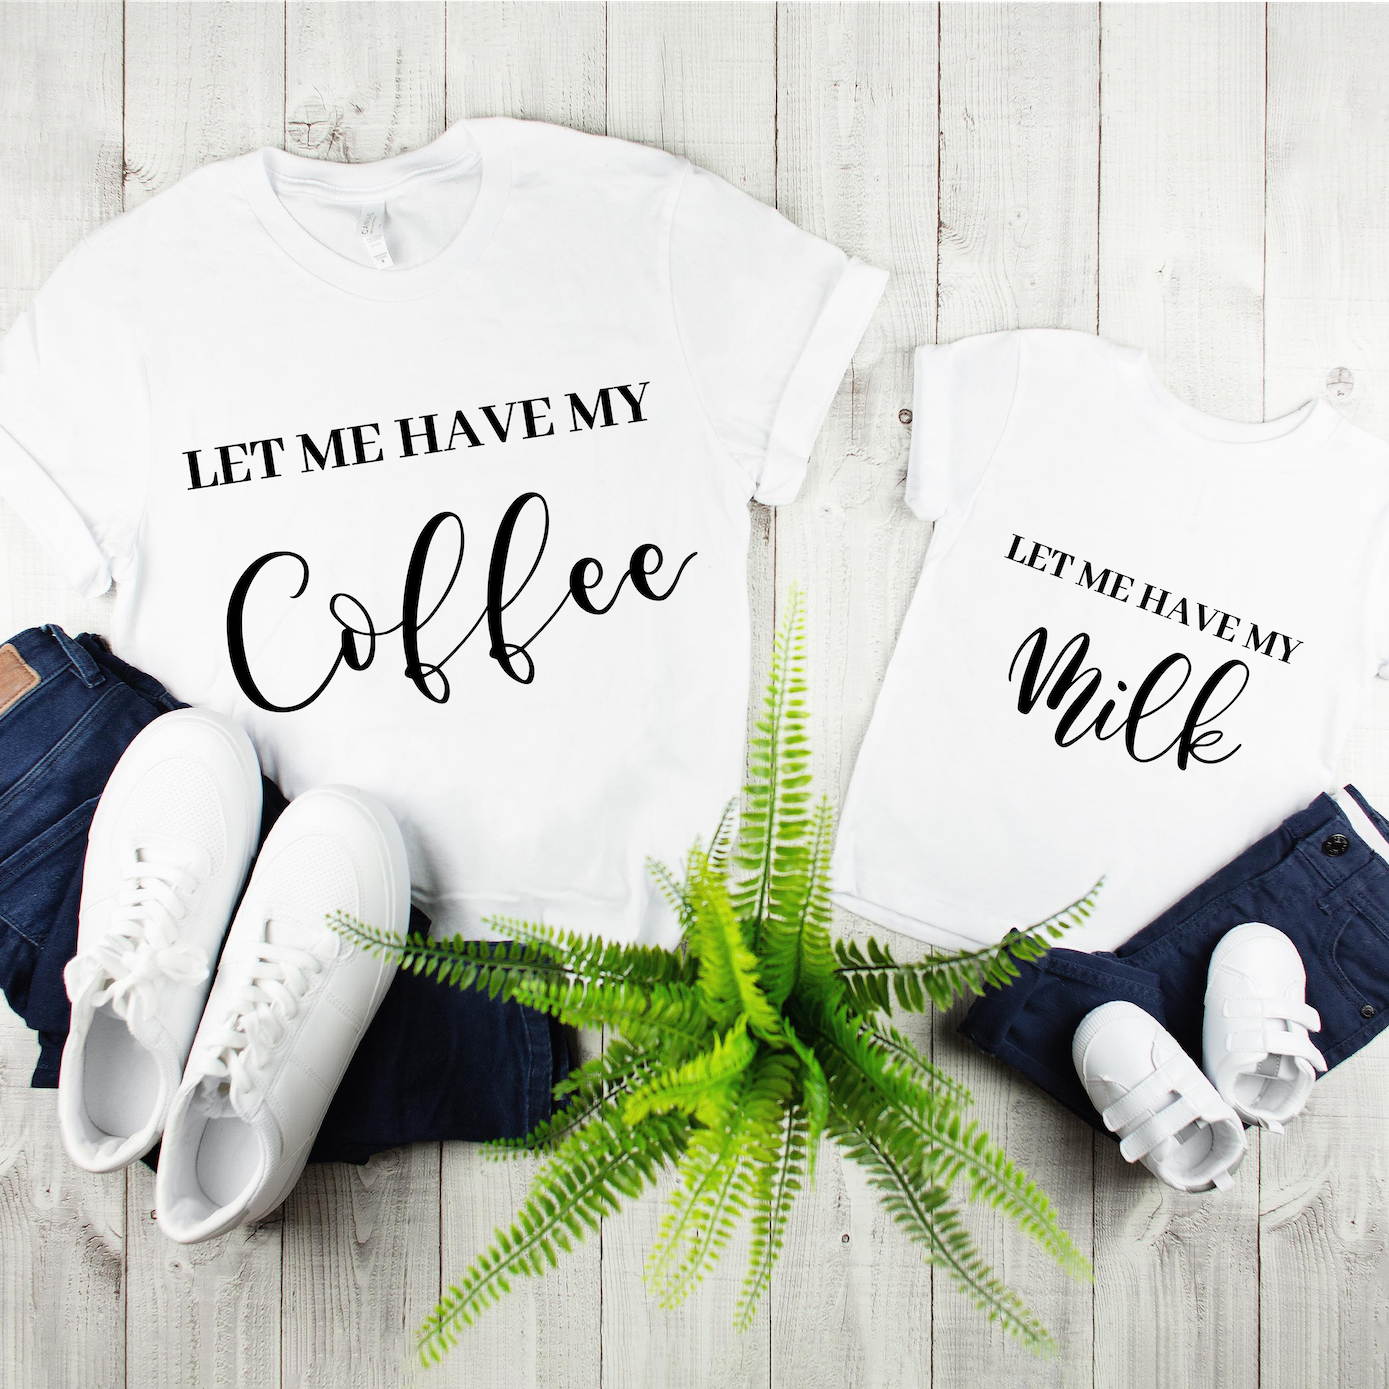 "Let Me Have My Milk" Child Tee - MamaBuzz Creations